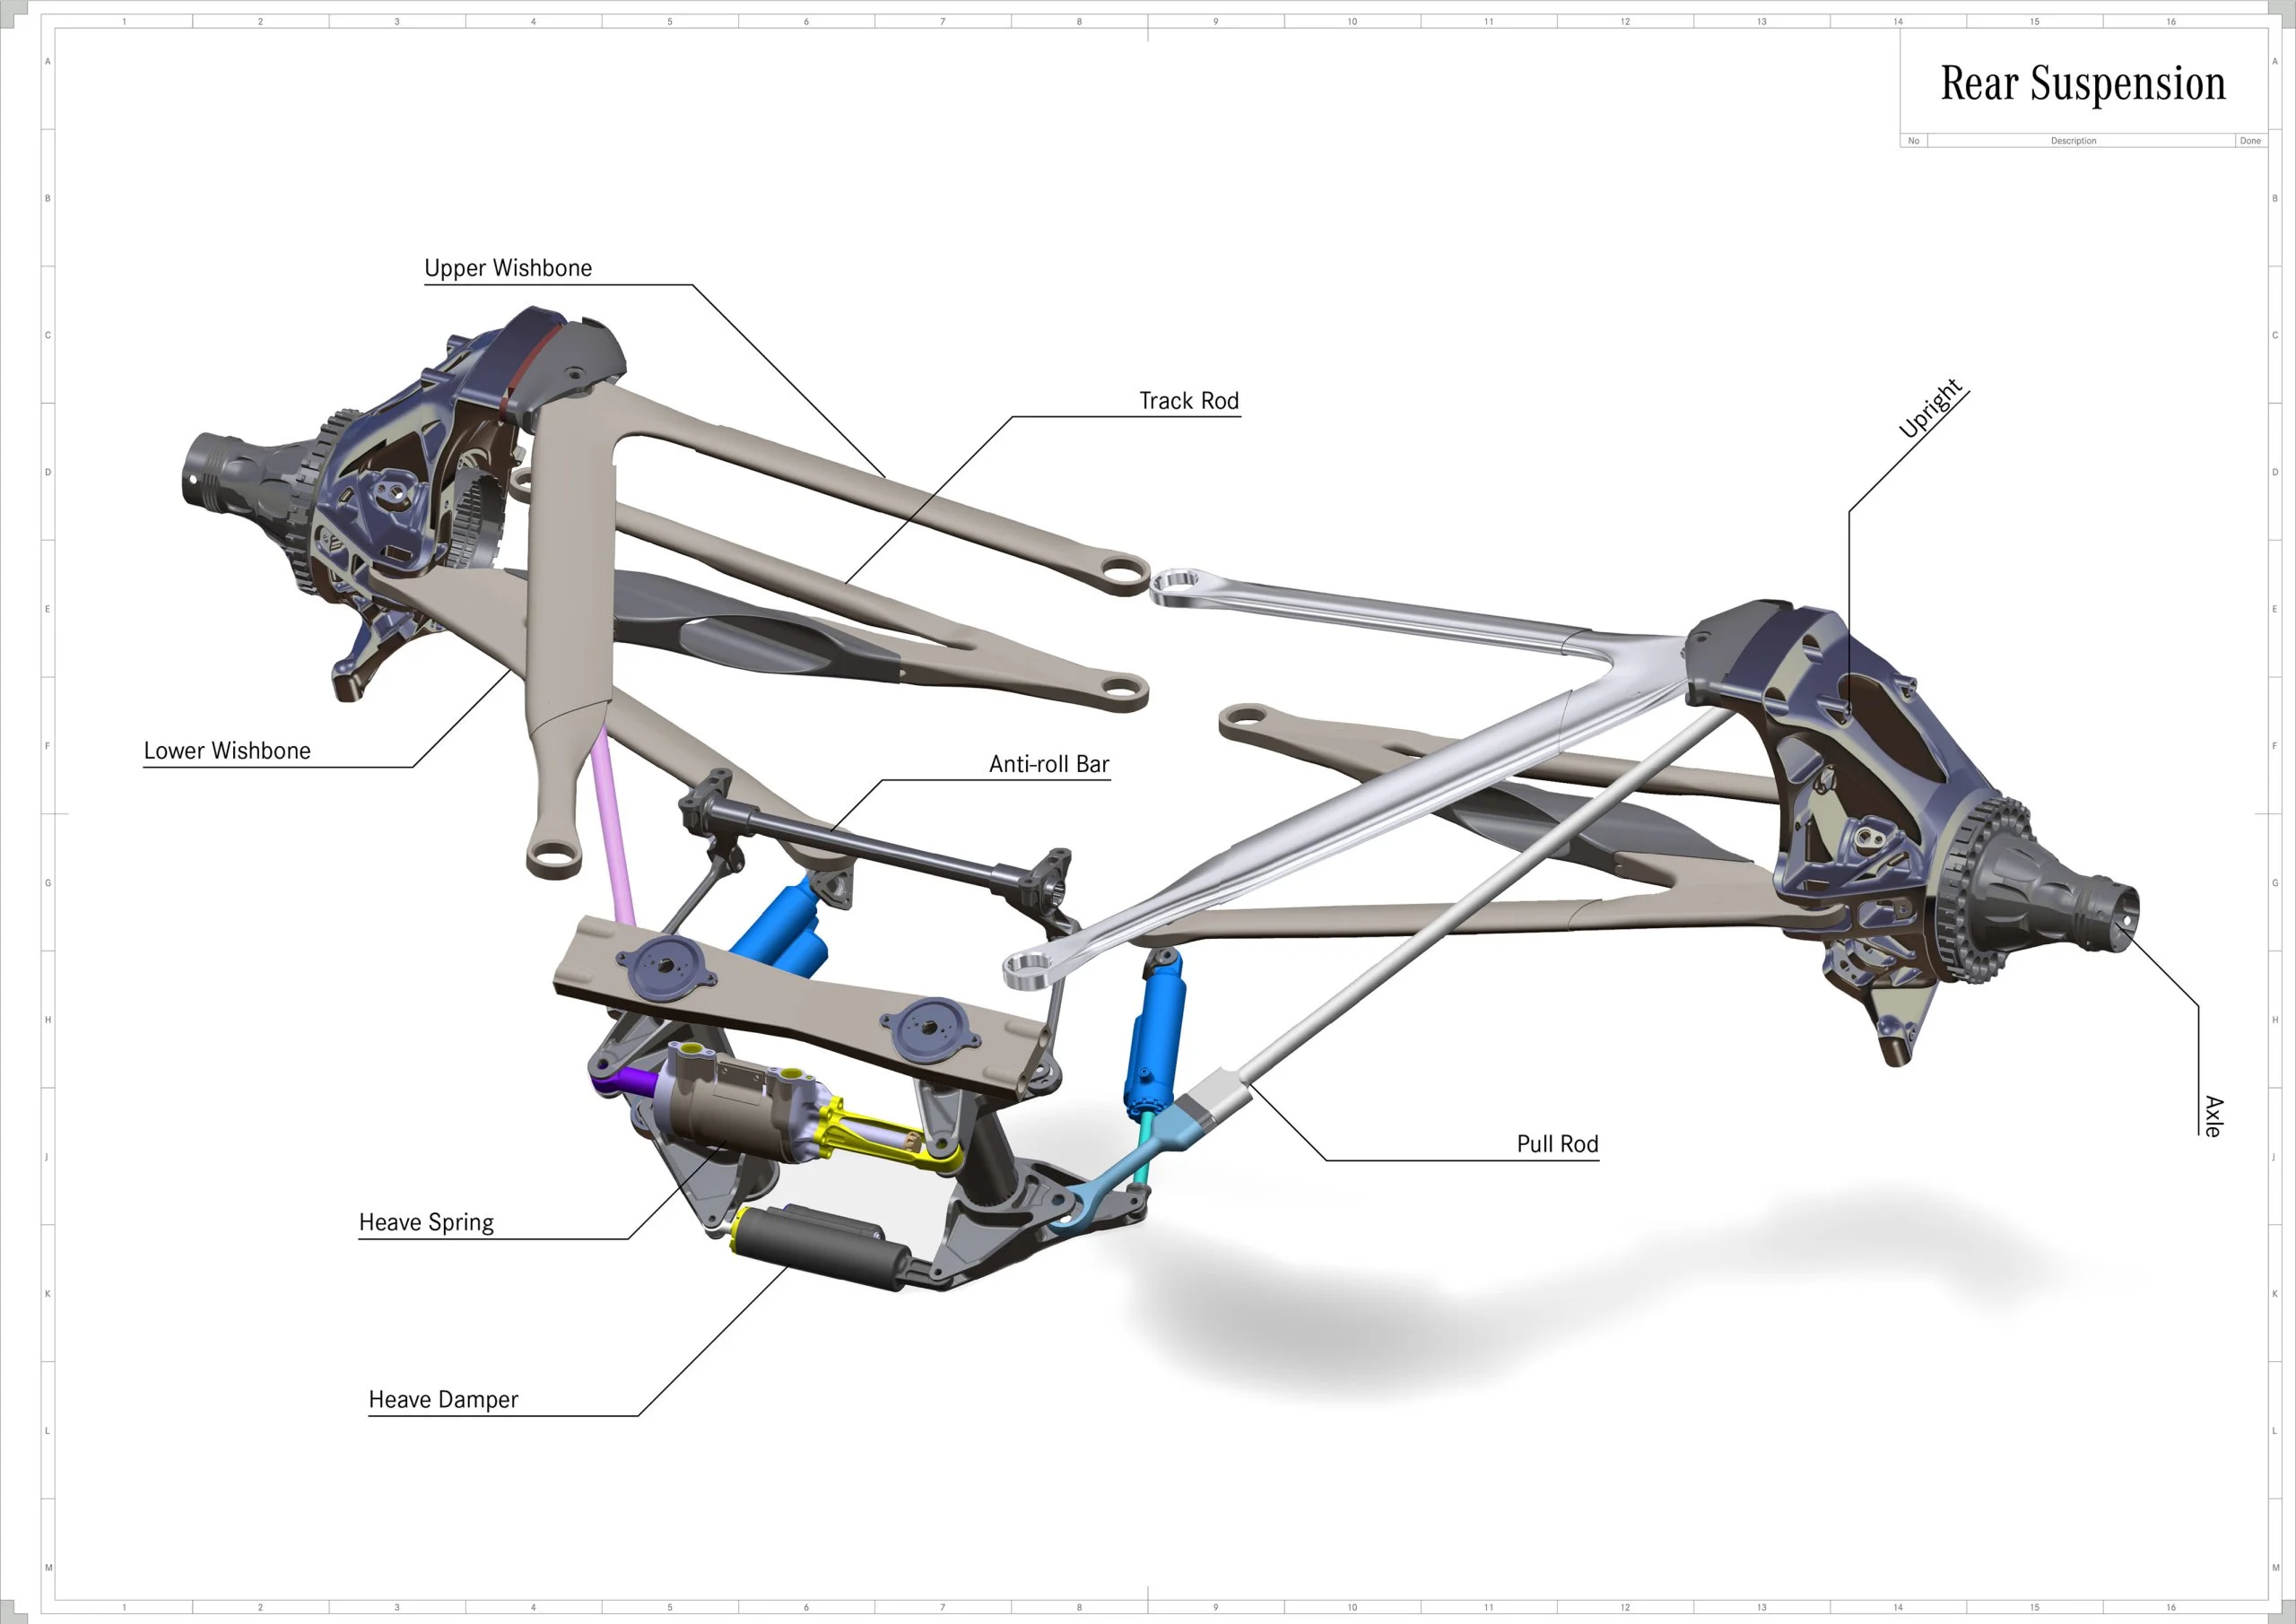 Anti-roll bar definition and meaning